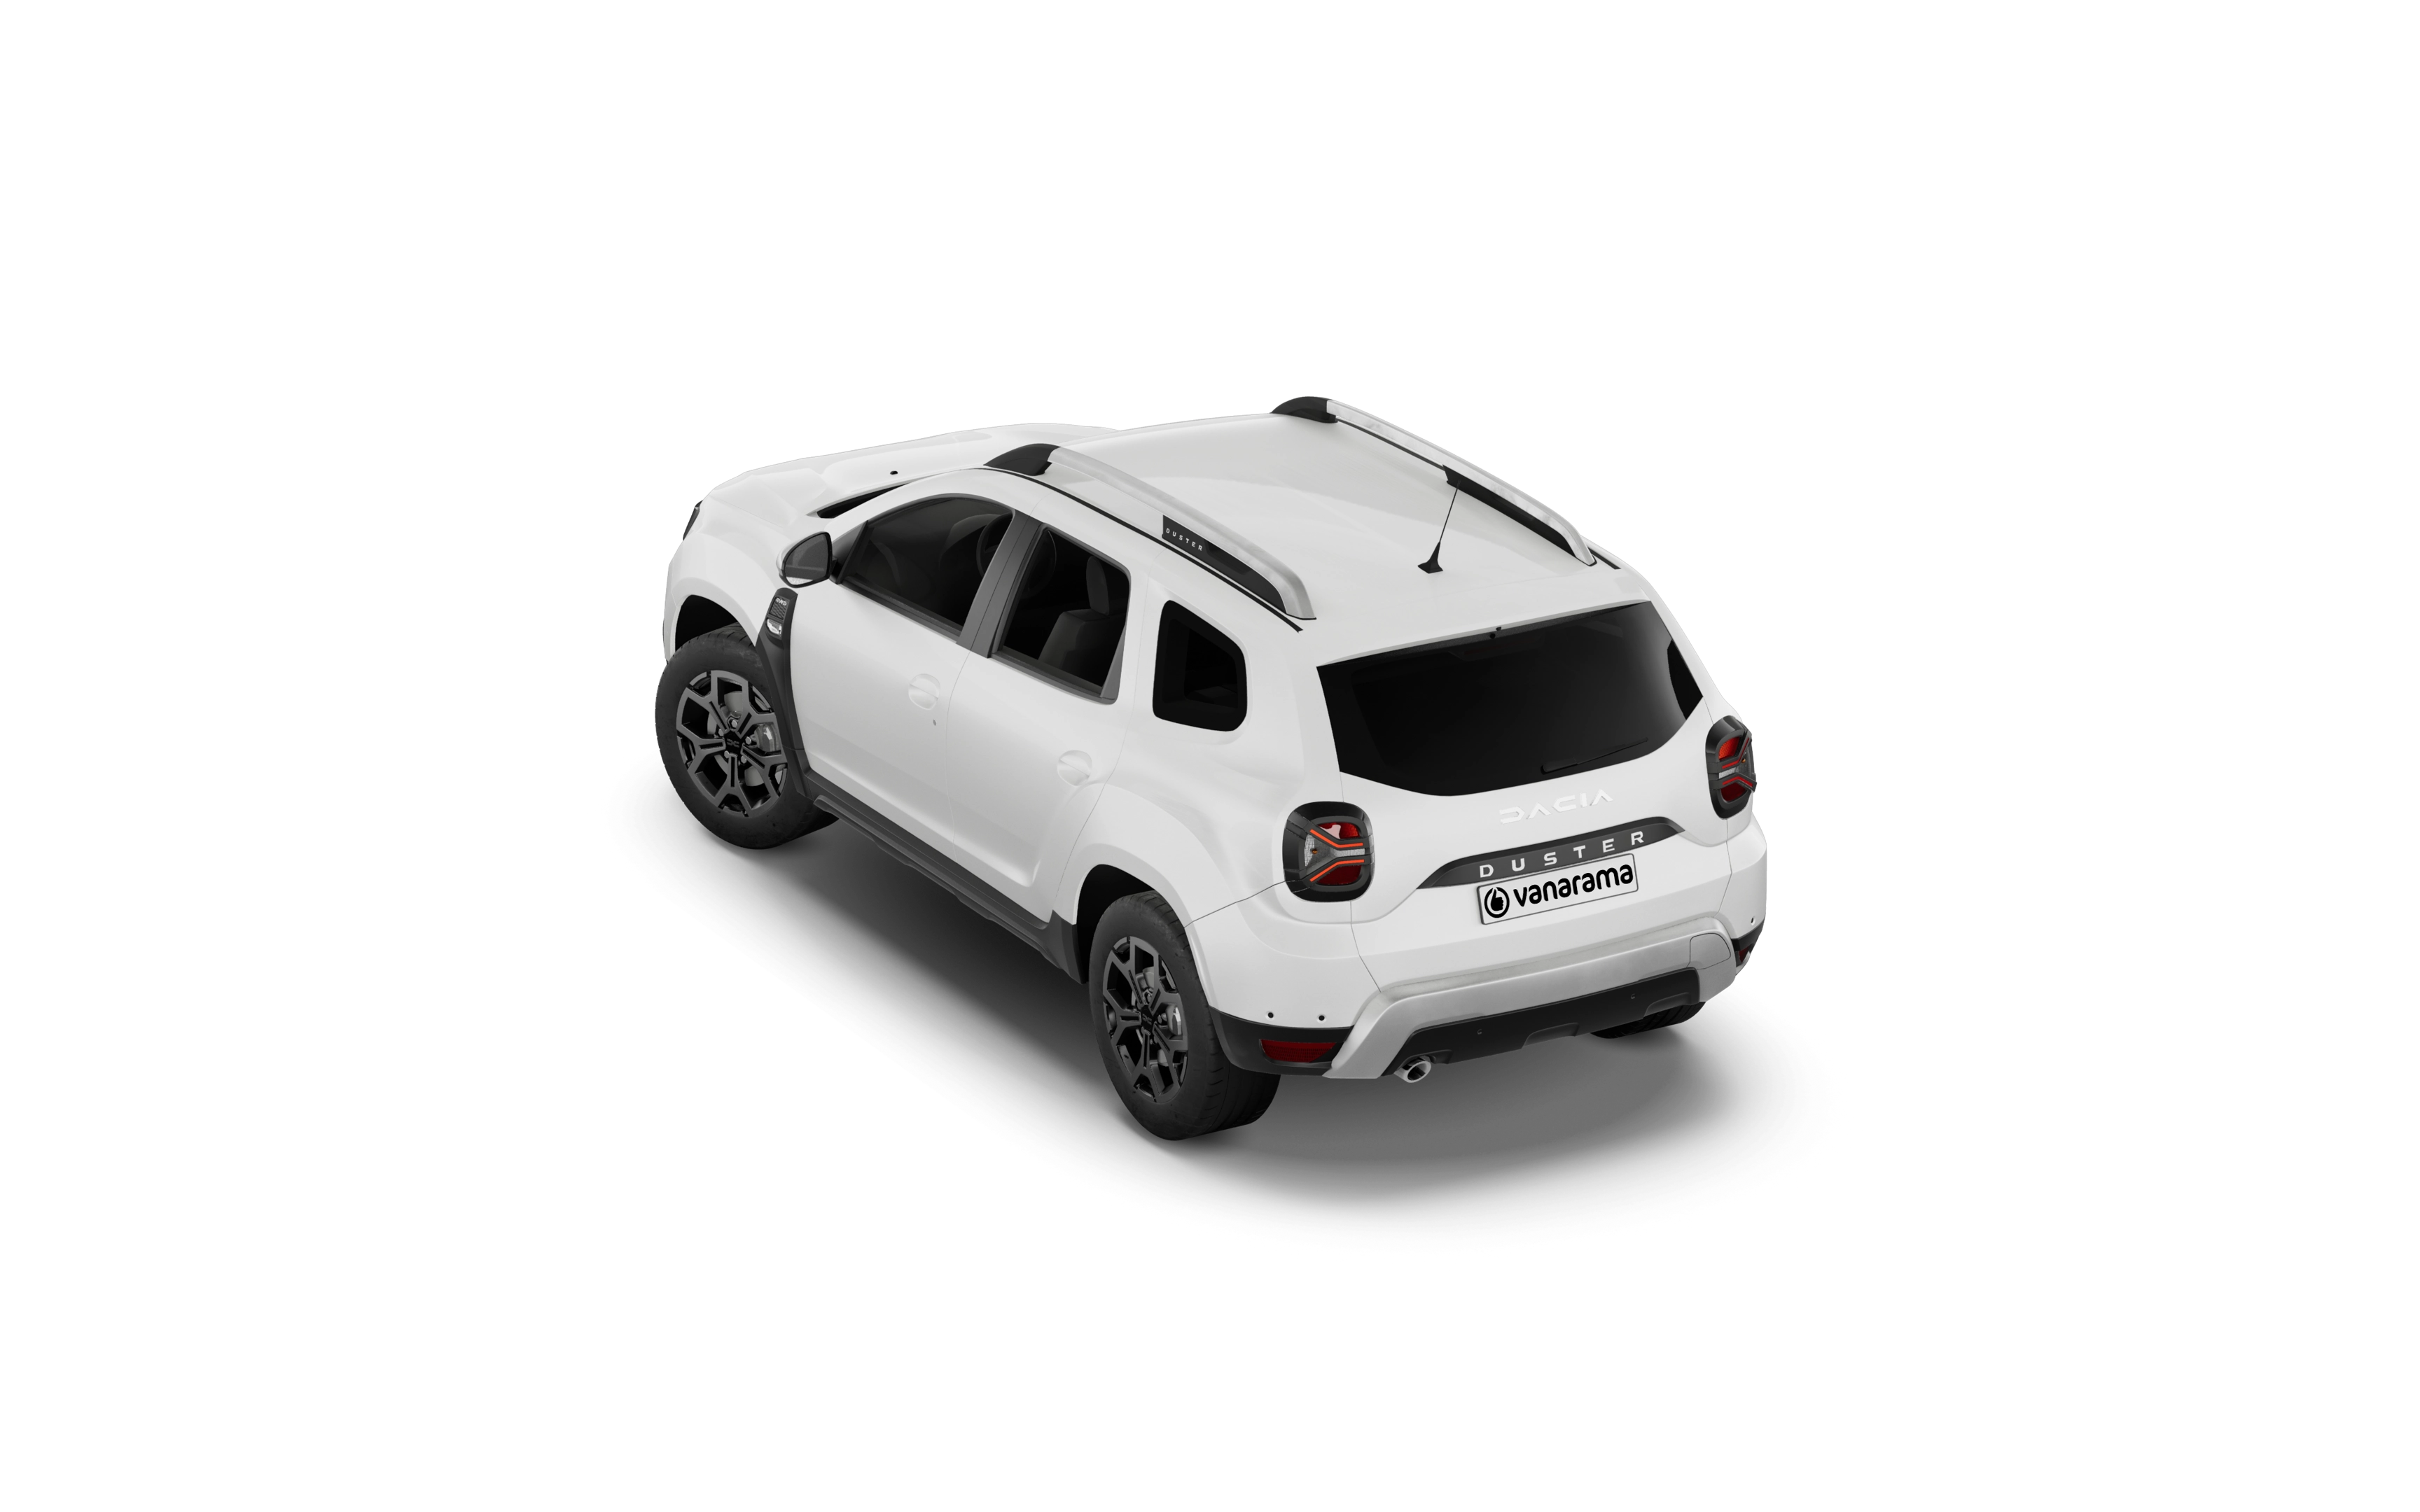 Dacia duster estate 1.3 tce 130 extreme 5 doors